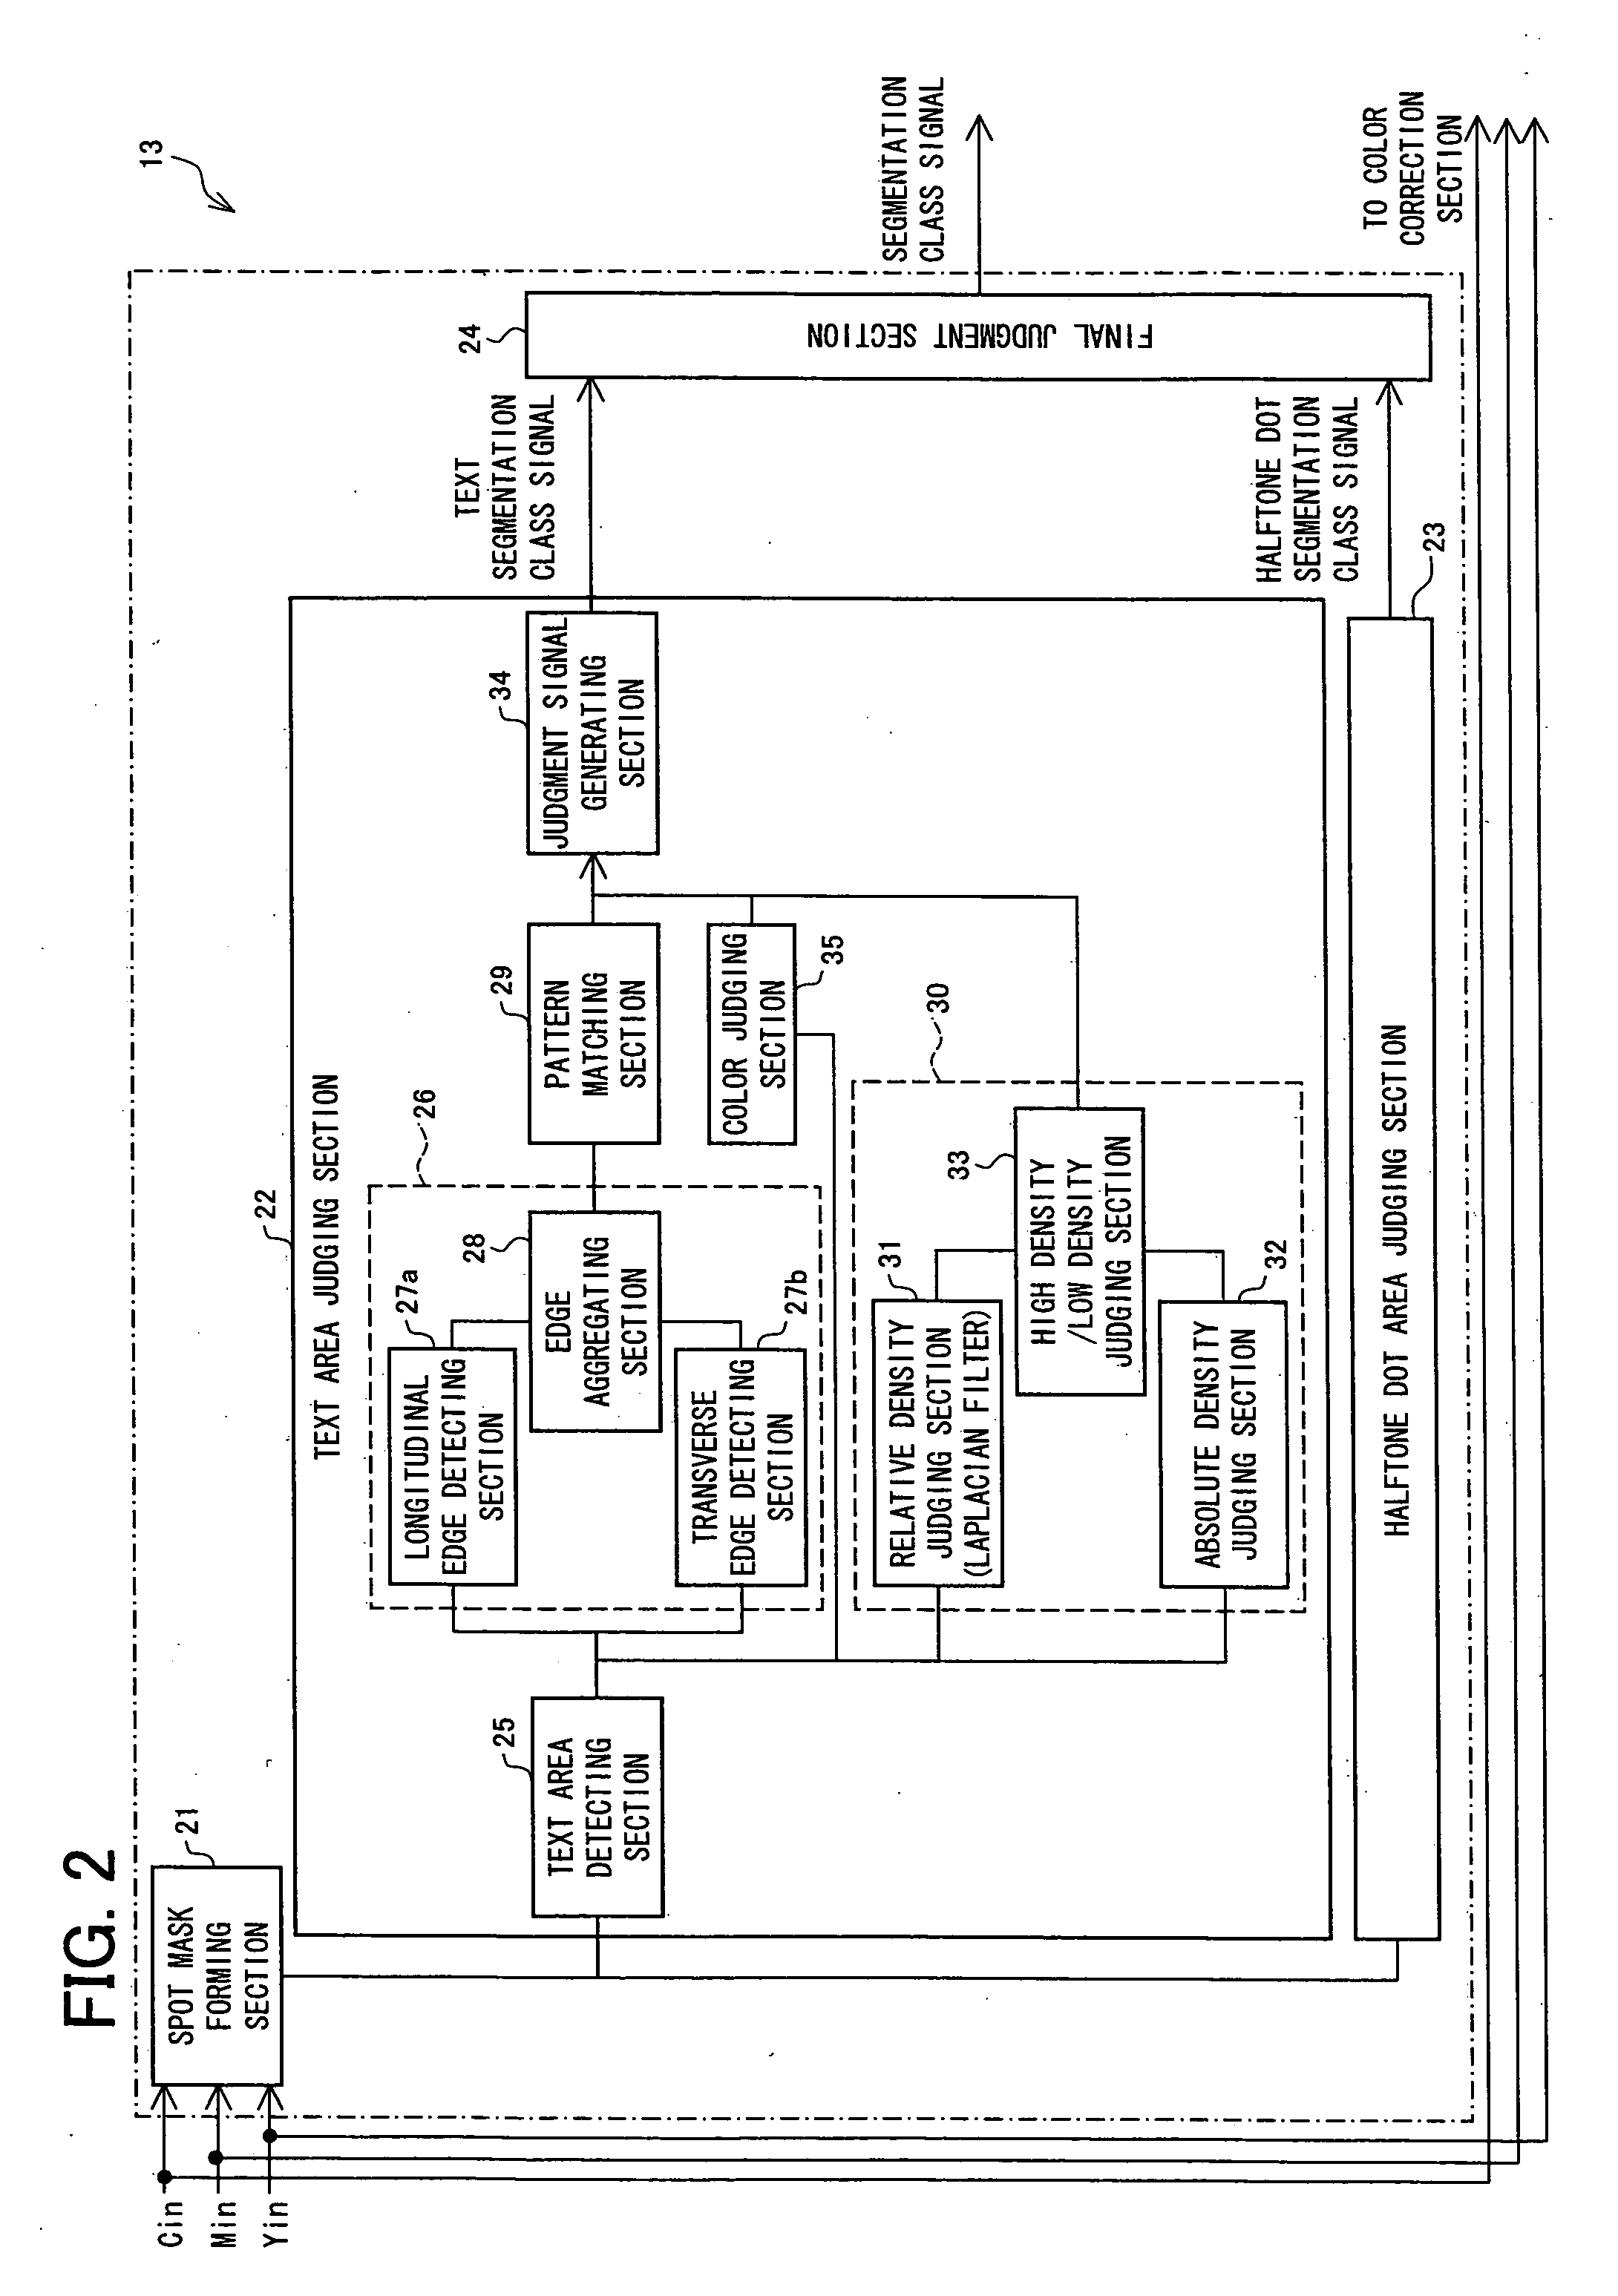 Image processing apparatus, image forming apparatus, image processing method, image processing program, and storage medium for the program